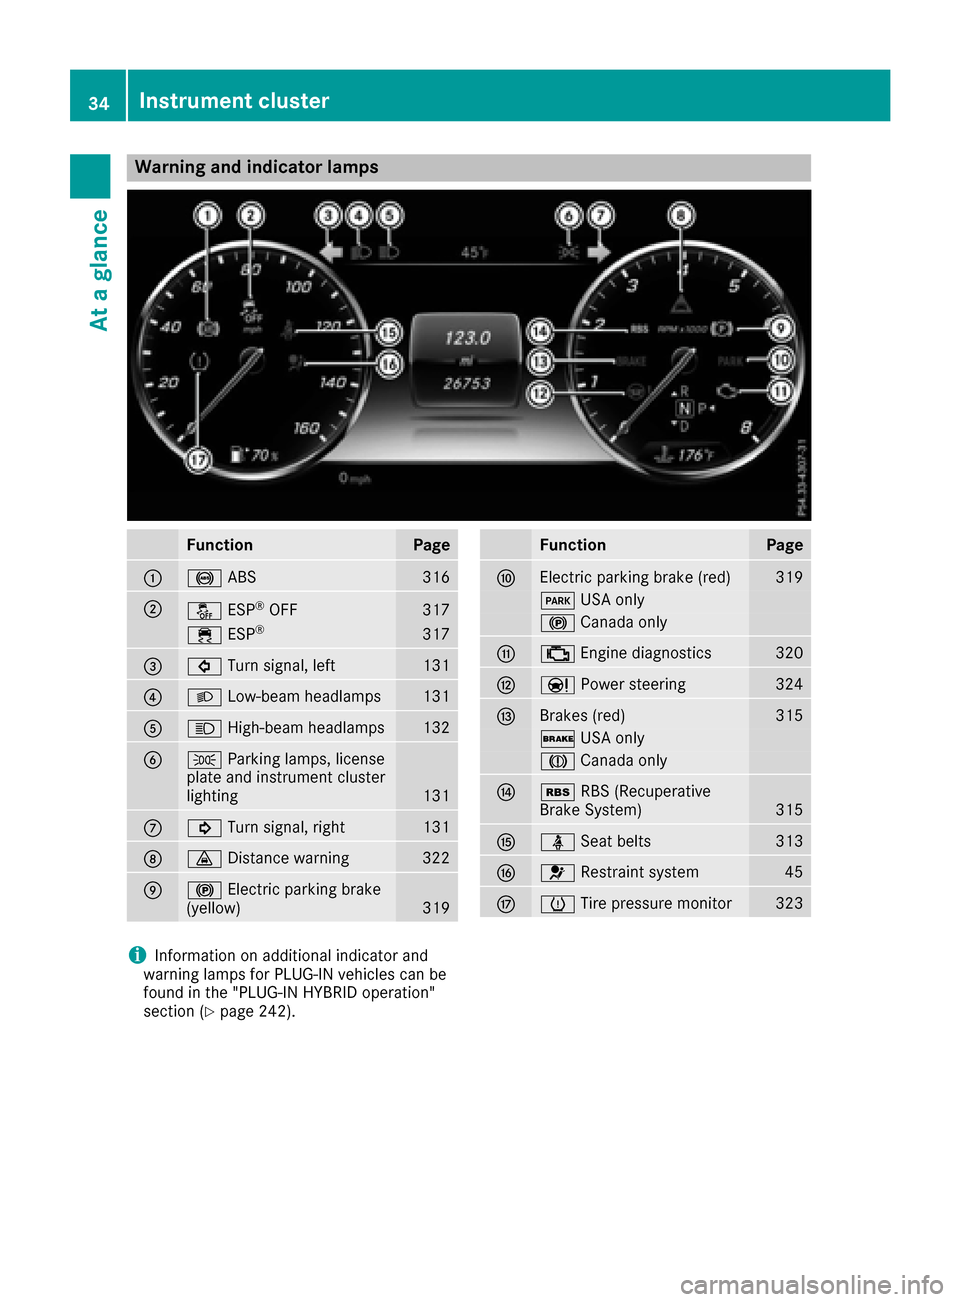 MERCEDES-BENZ S-Class SEDAN 2016 W222 User Guide Warning and indicator lamps
FunctionPage
:!ABS316
;åESP®OFF317
÷ESP®317
=#Turn signal, left131
?LLow-beam headlamps131
AKHigh-beam headlamps132
BTParking lamps, license
plate and instrument cluste